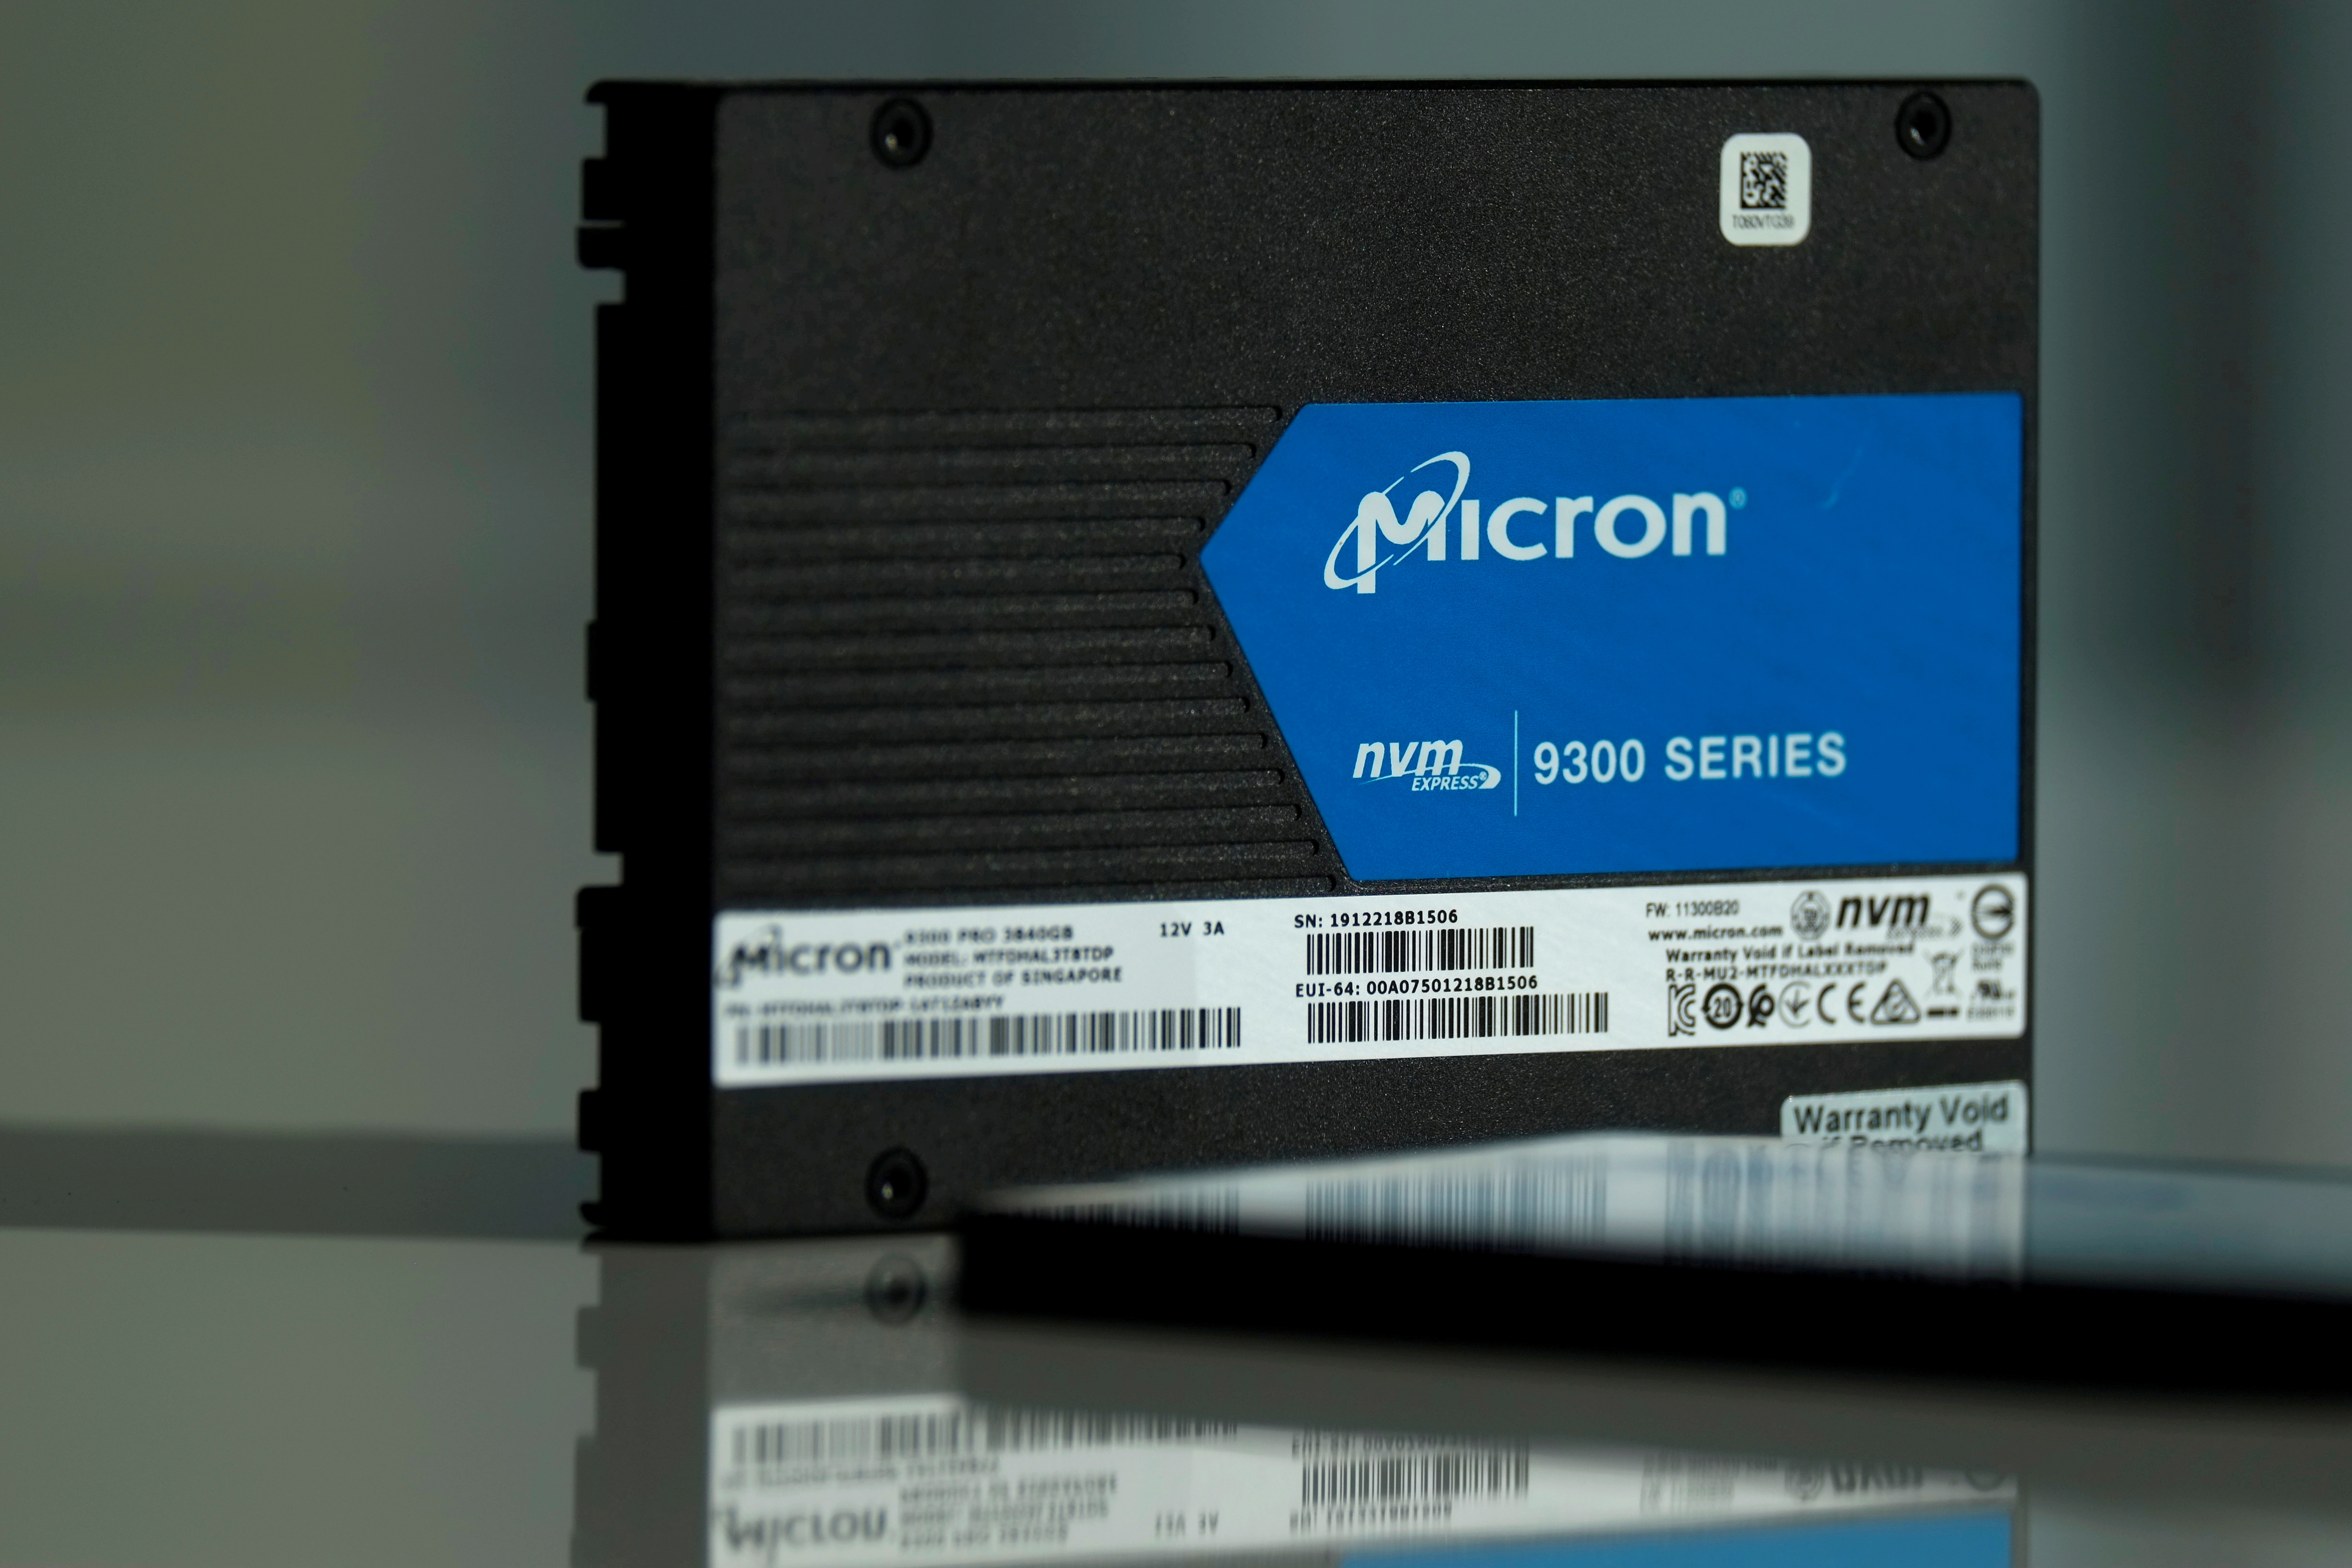 Micron Technology's solid-state drive for data center customers is presented at a product launch event in San Francisco